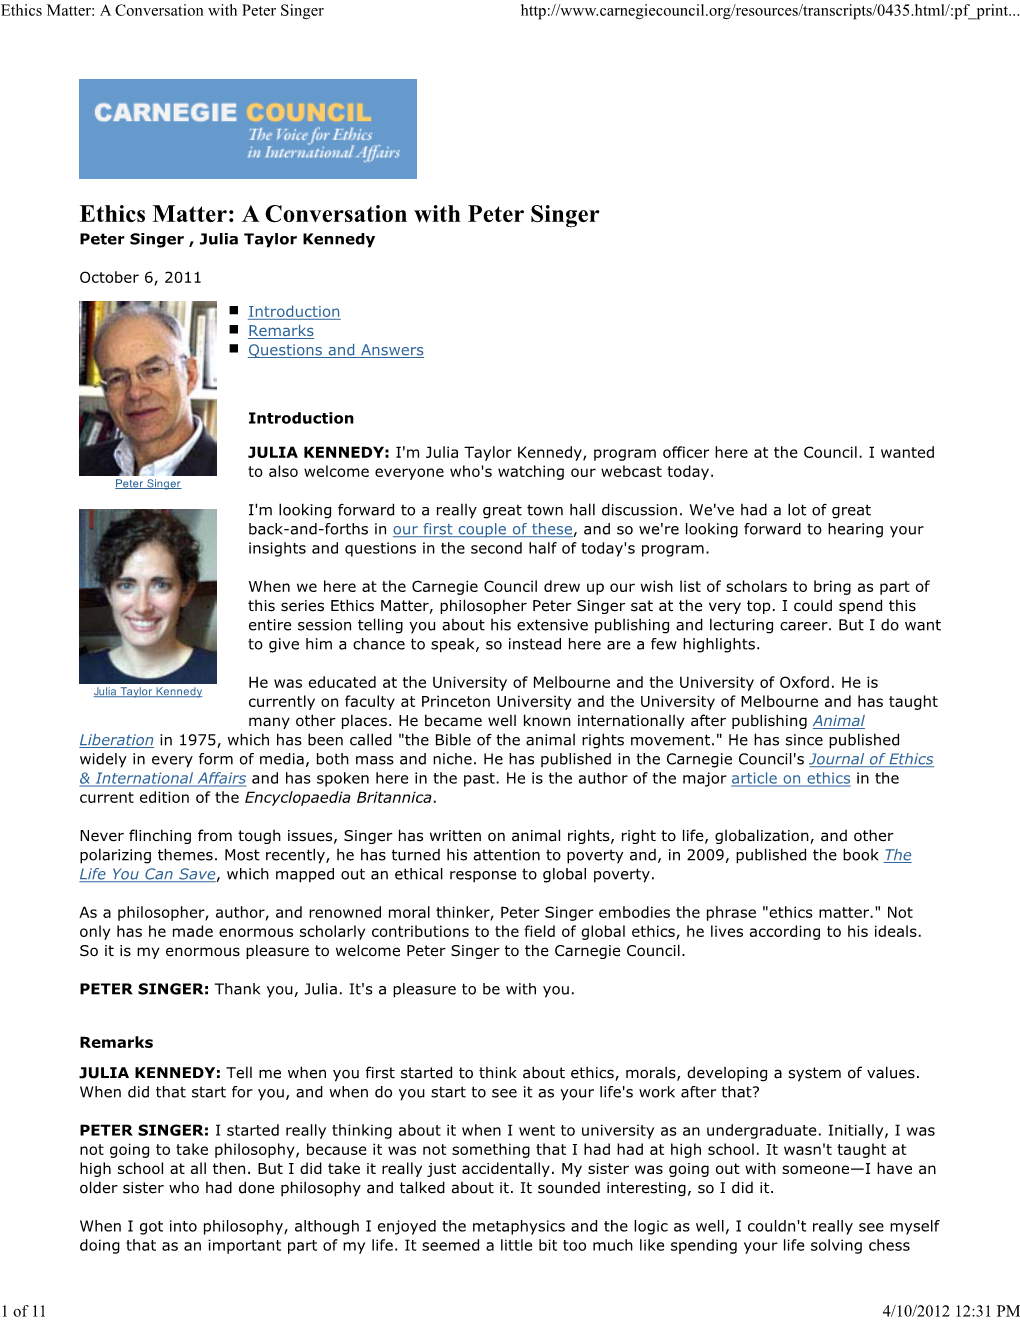 Ethics Matter: a Conversation with Peter Singer